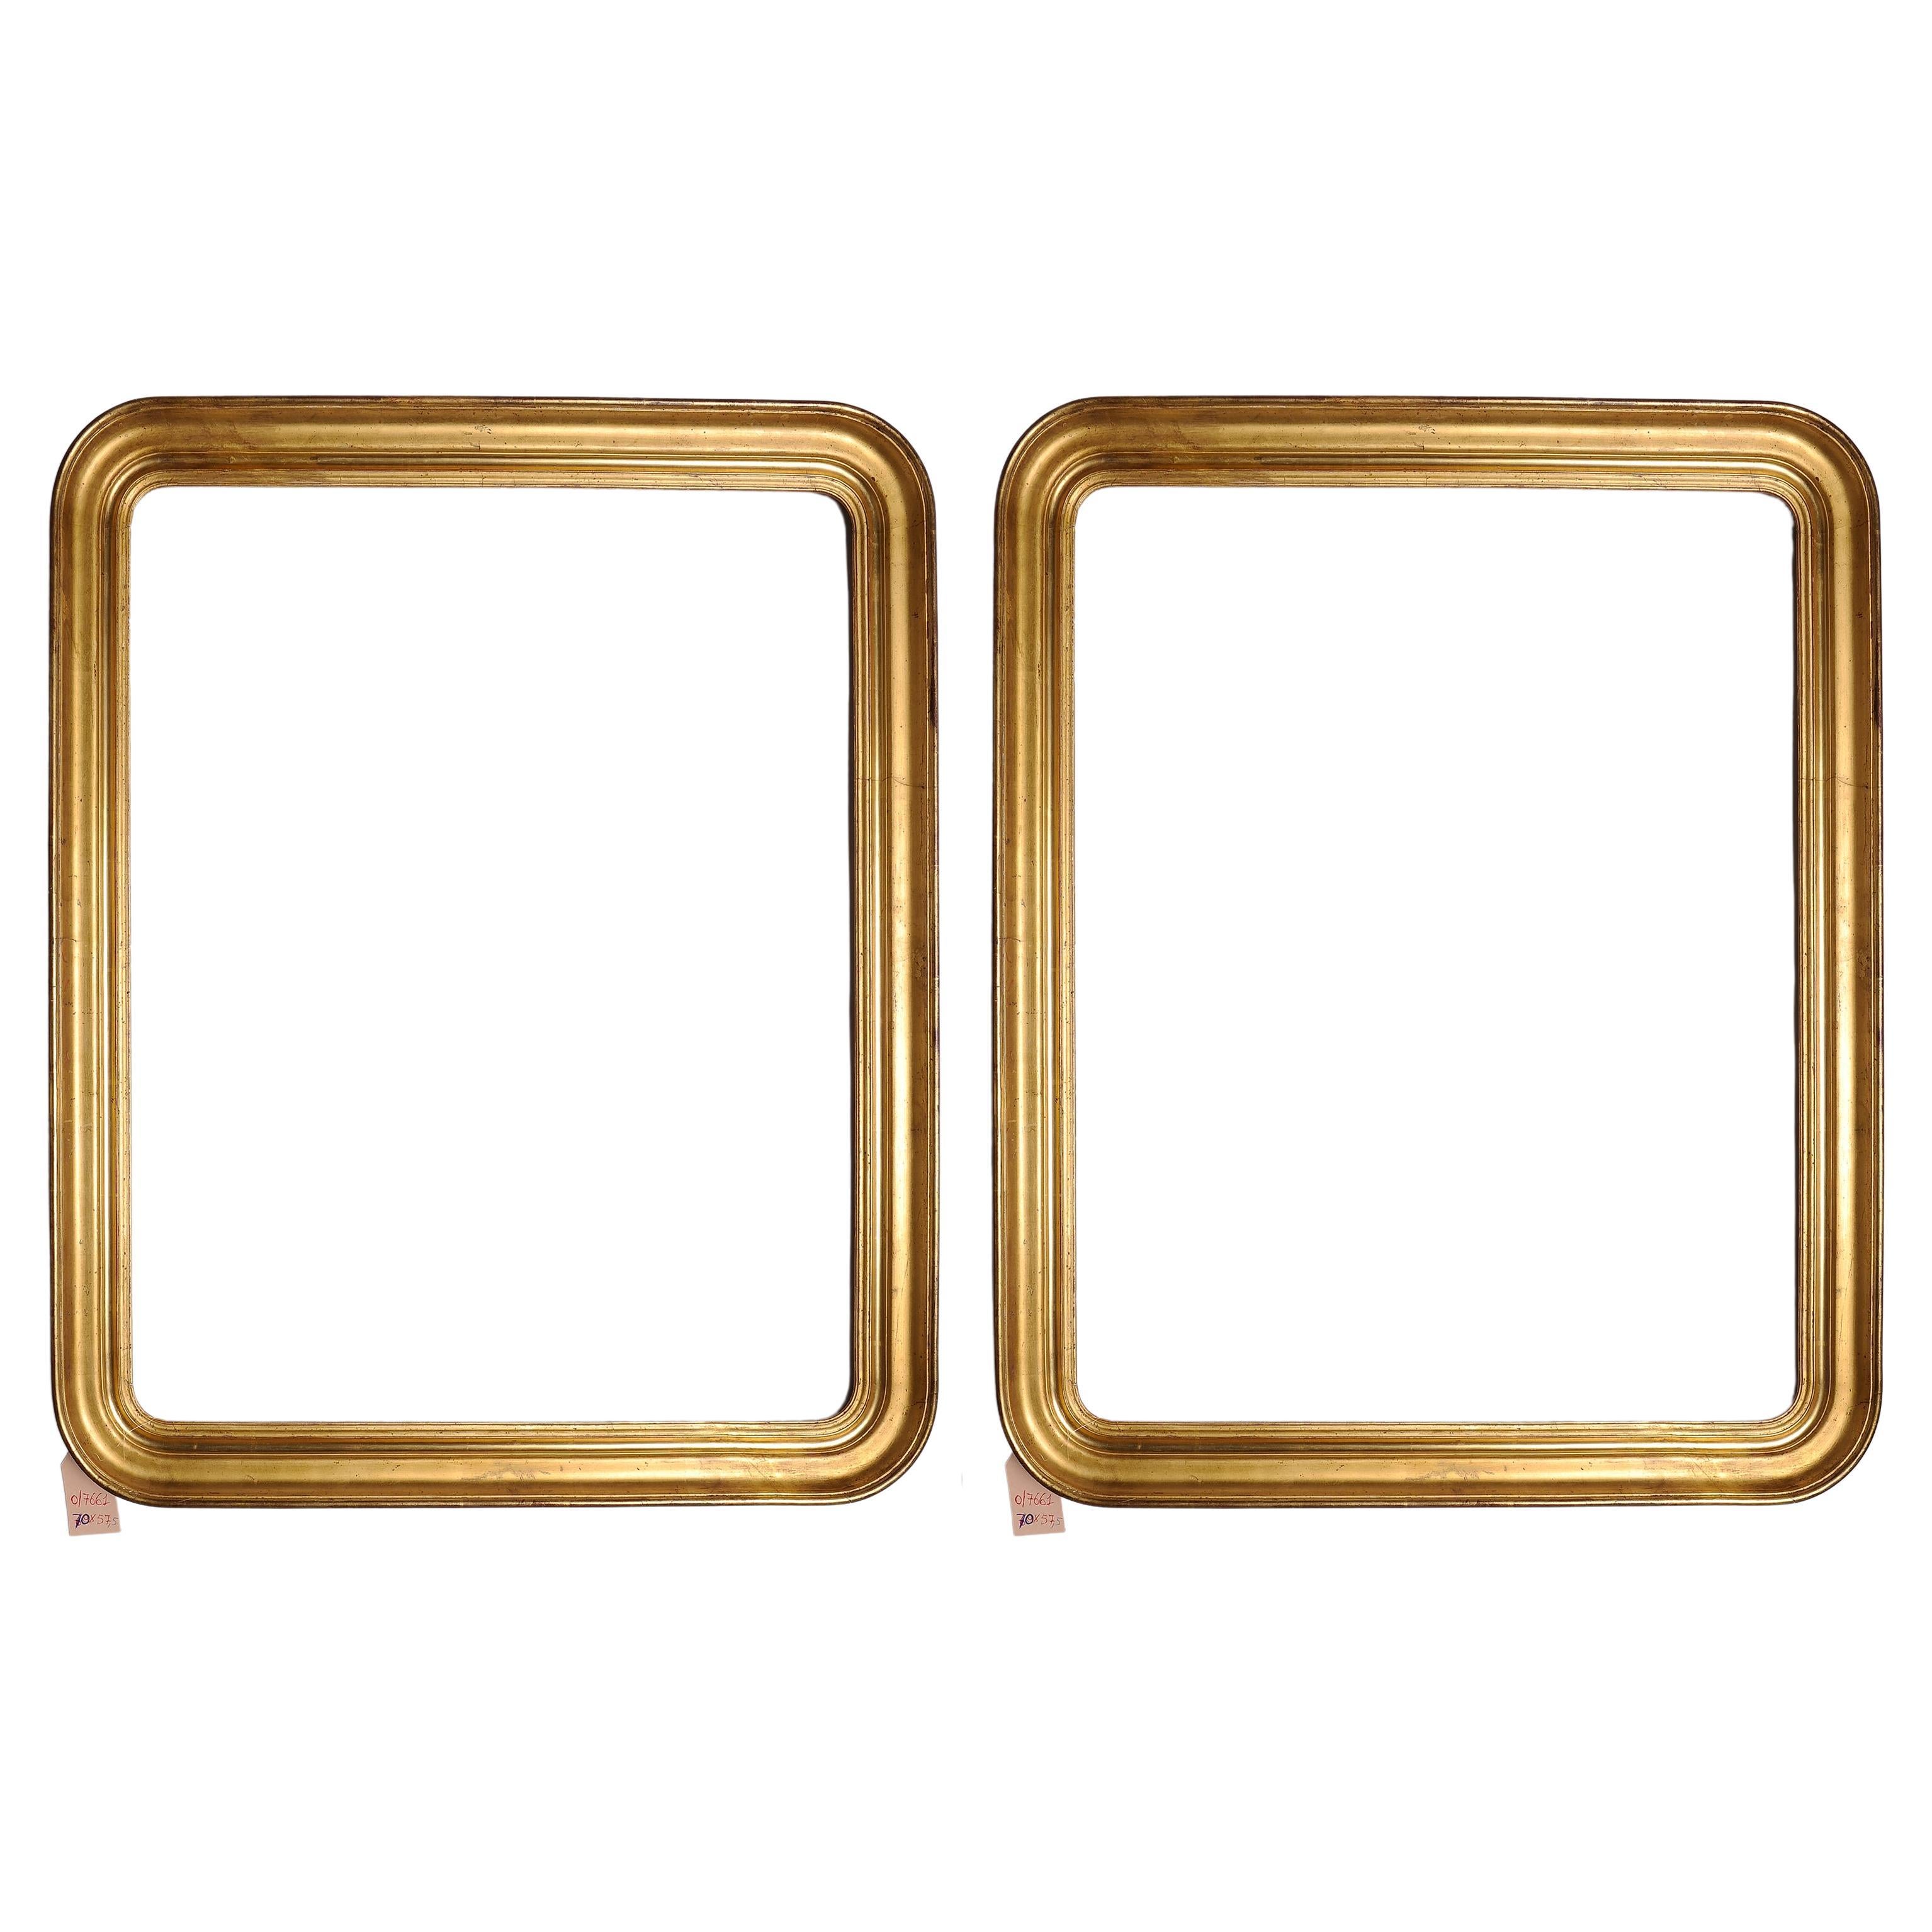 Pair of Gilded Wooden Frames For Sale